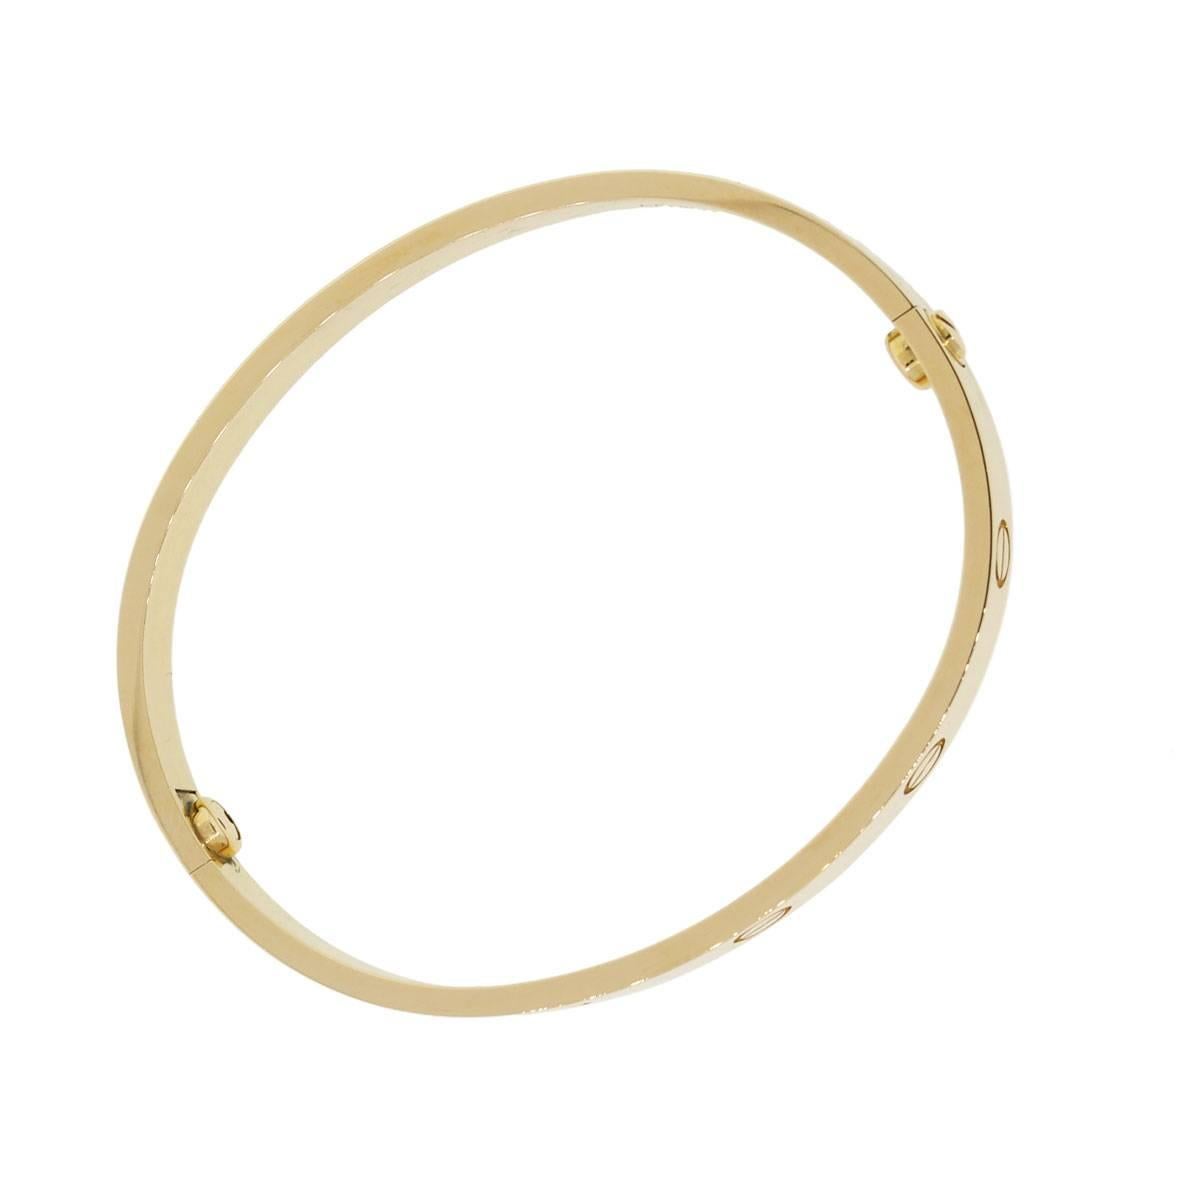 Designer: Cartier
Material: 18k yellow gold
Measurements: Size 17
Total Weight: 32.1g (20.6dwt)
Additional Details: This item comes with a Cartier box, certificate and screwdriver!
SKU: G7536